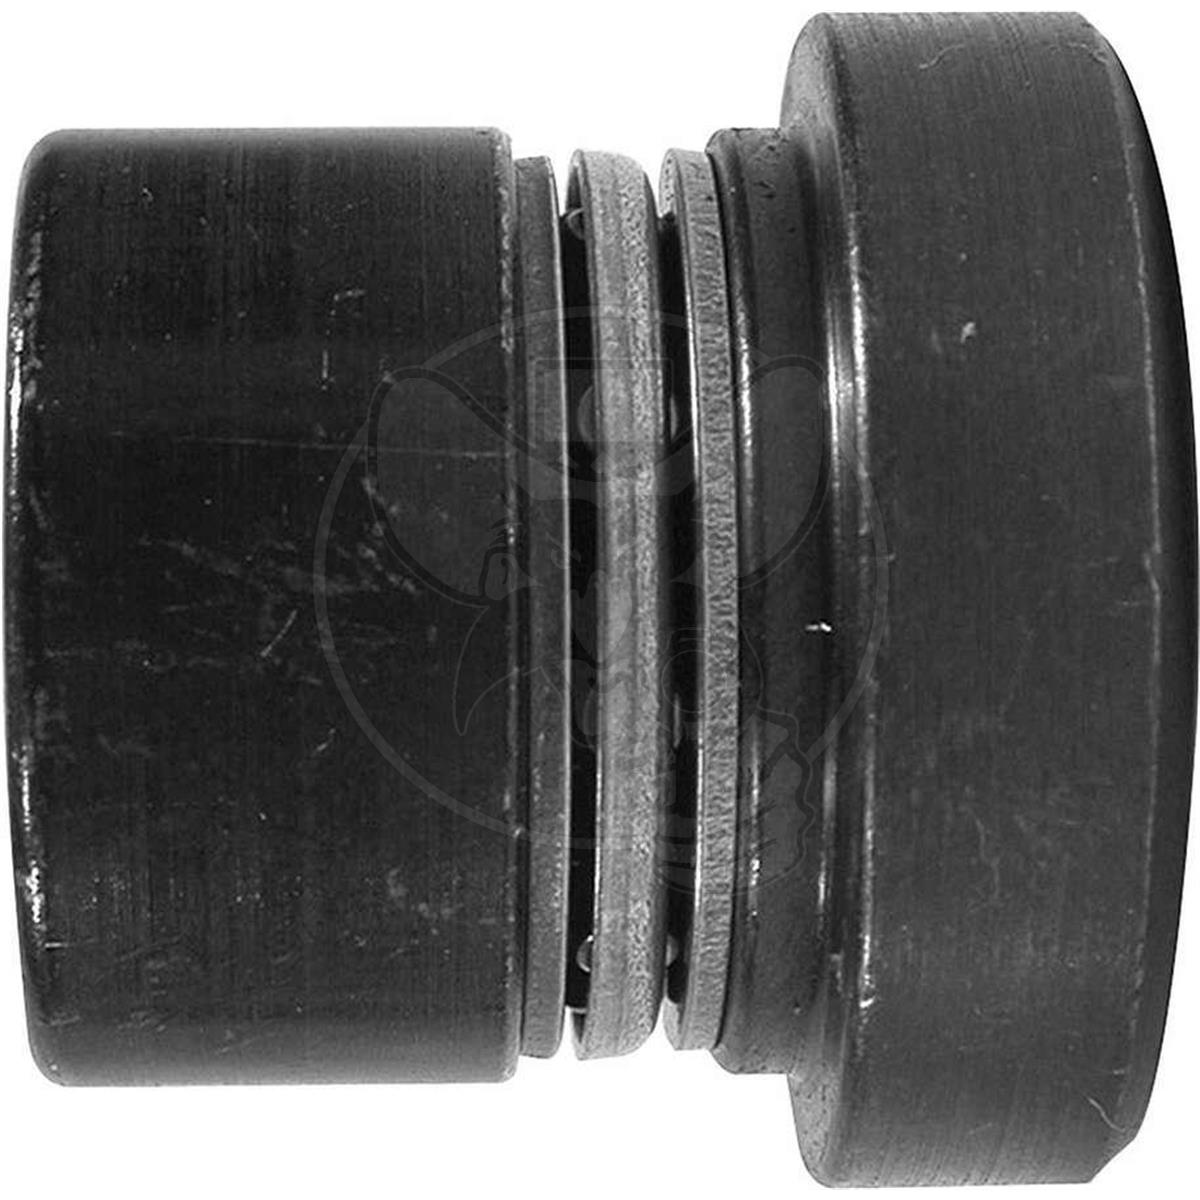 ALLSTAR CAM BUTTON ROLLER BEARING STYLE FITS SMALL BLOCK CHEV